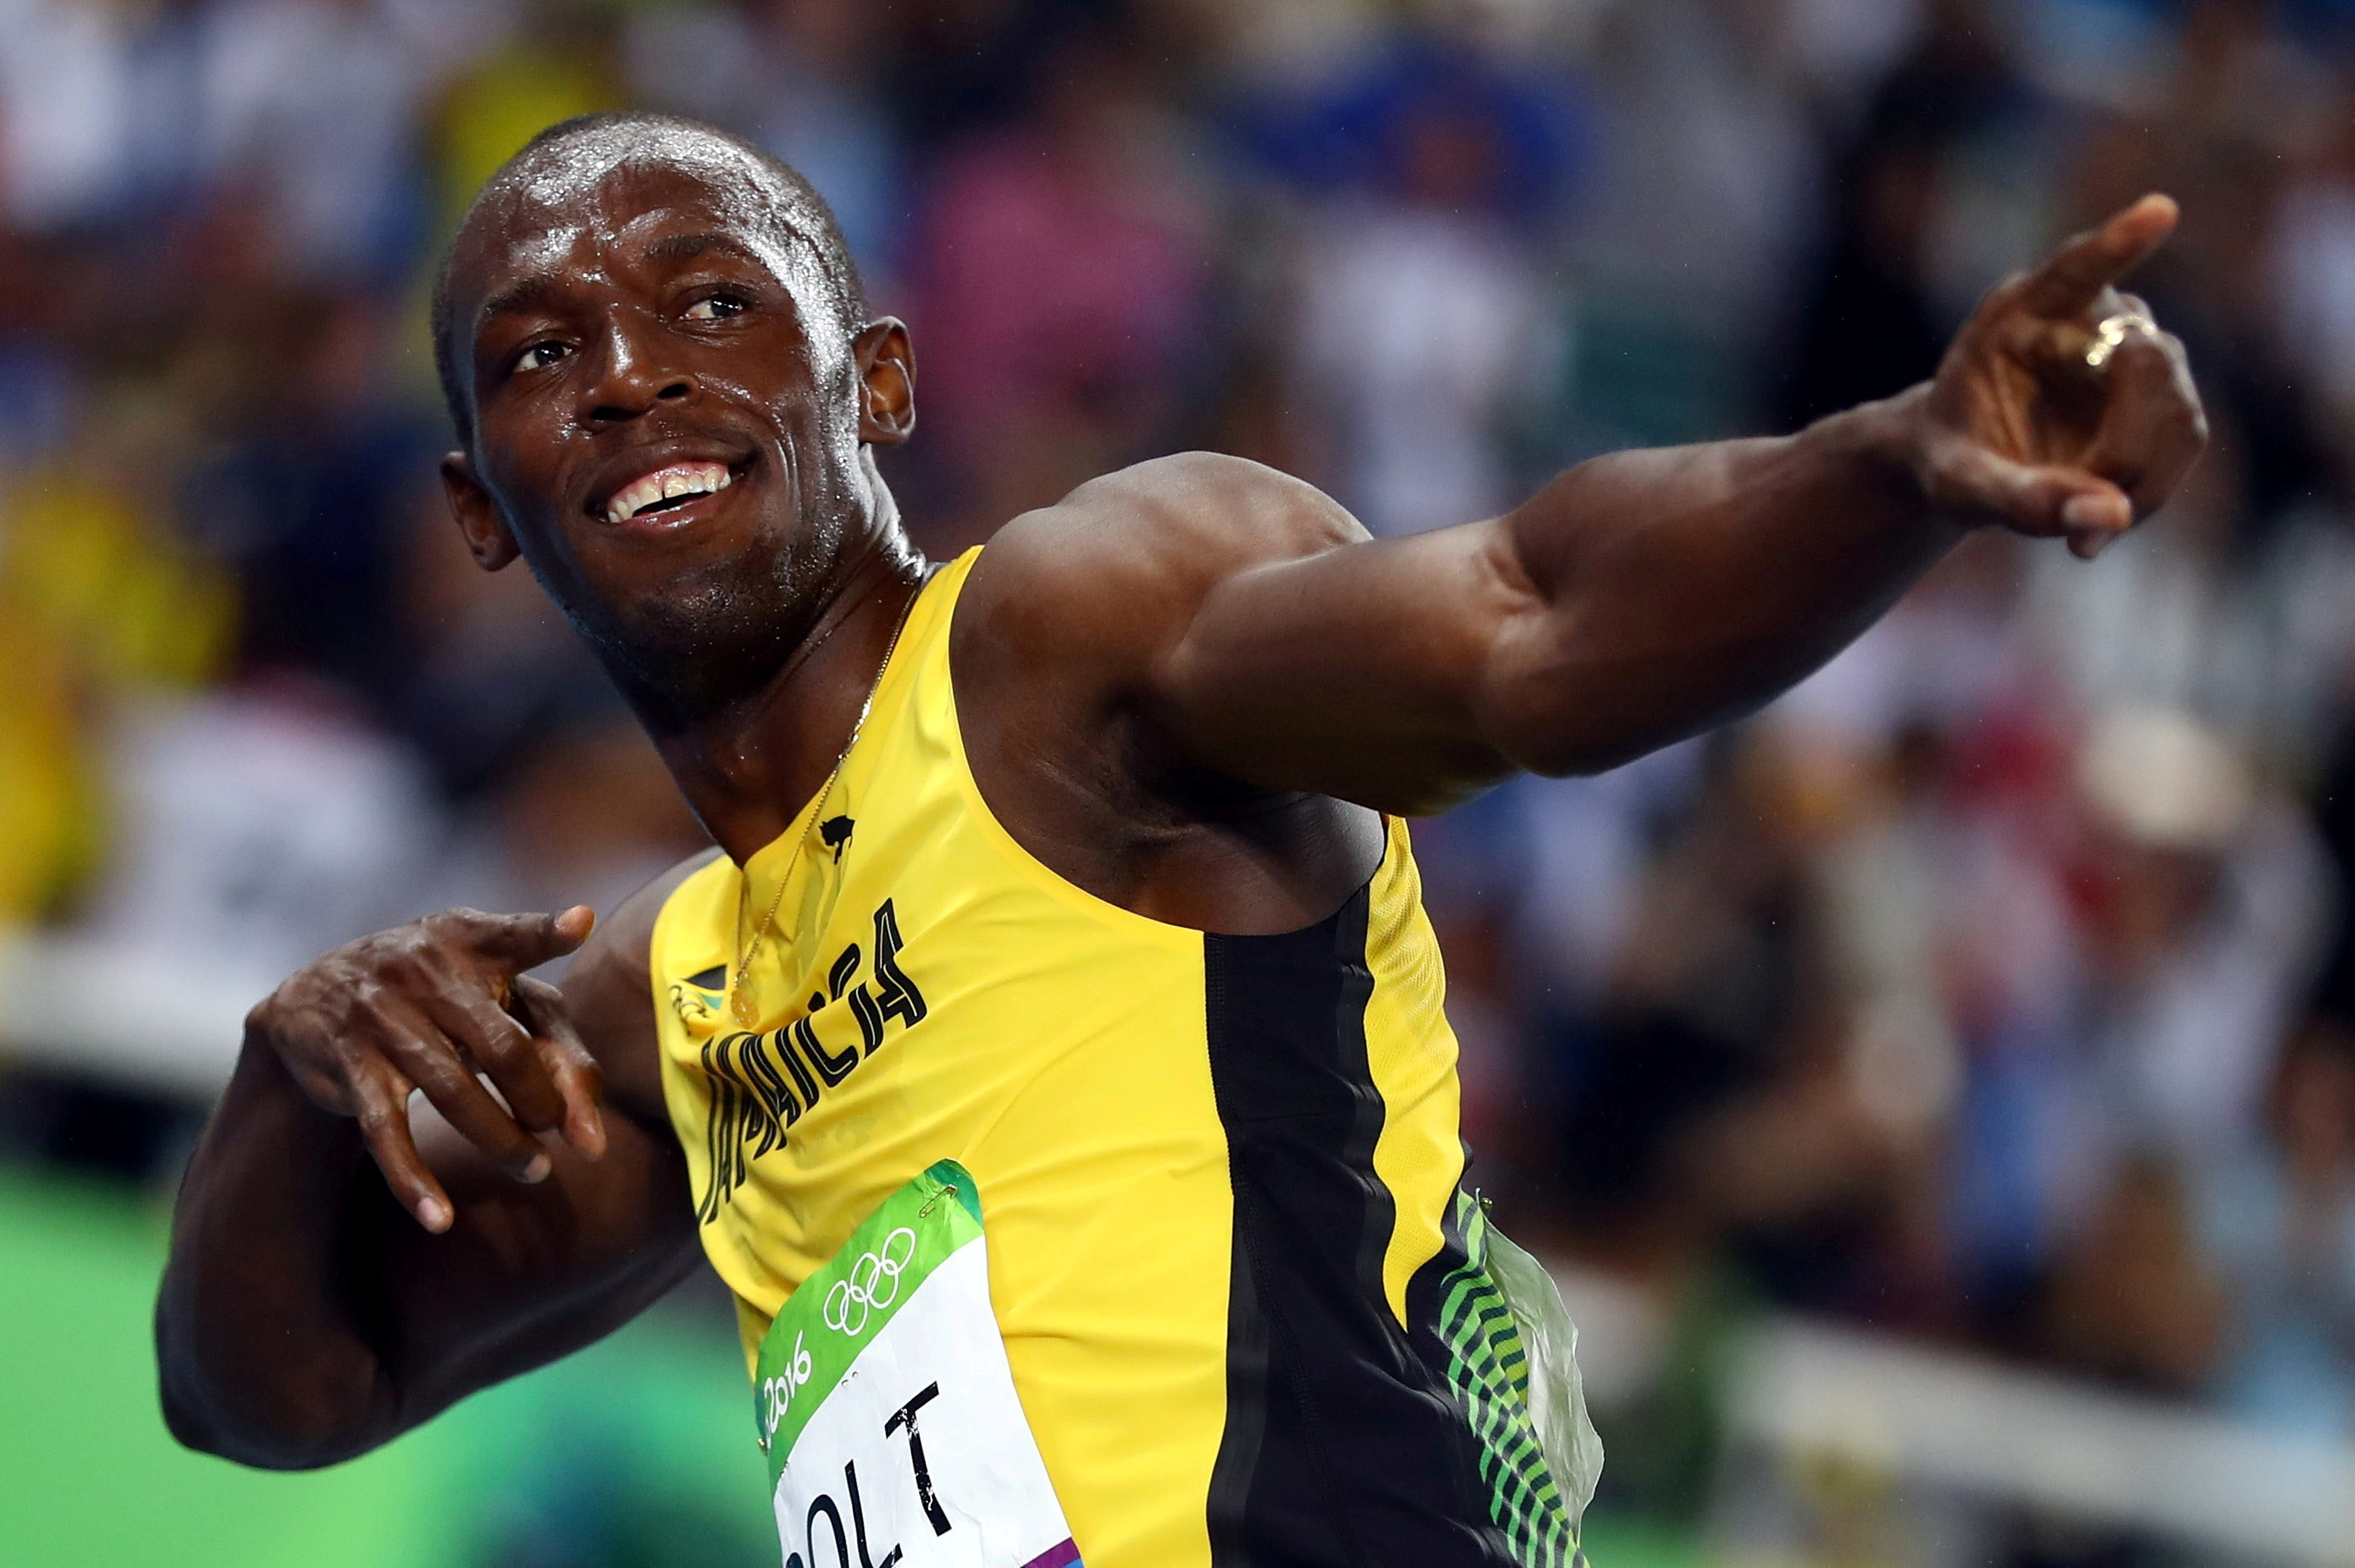 From Usain Bolt to the 'Champion' dance, sportsmen & their quirky rituals -  The Economic Times